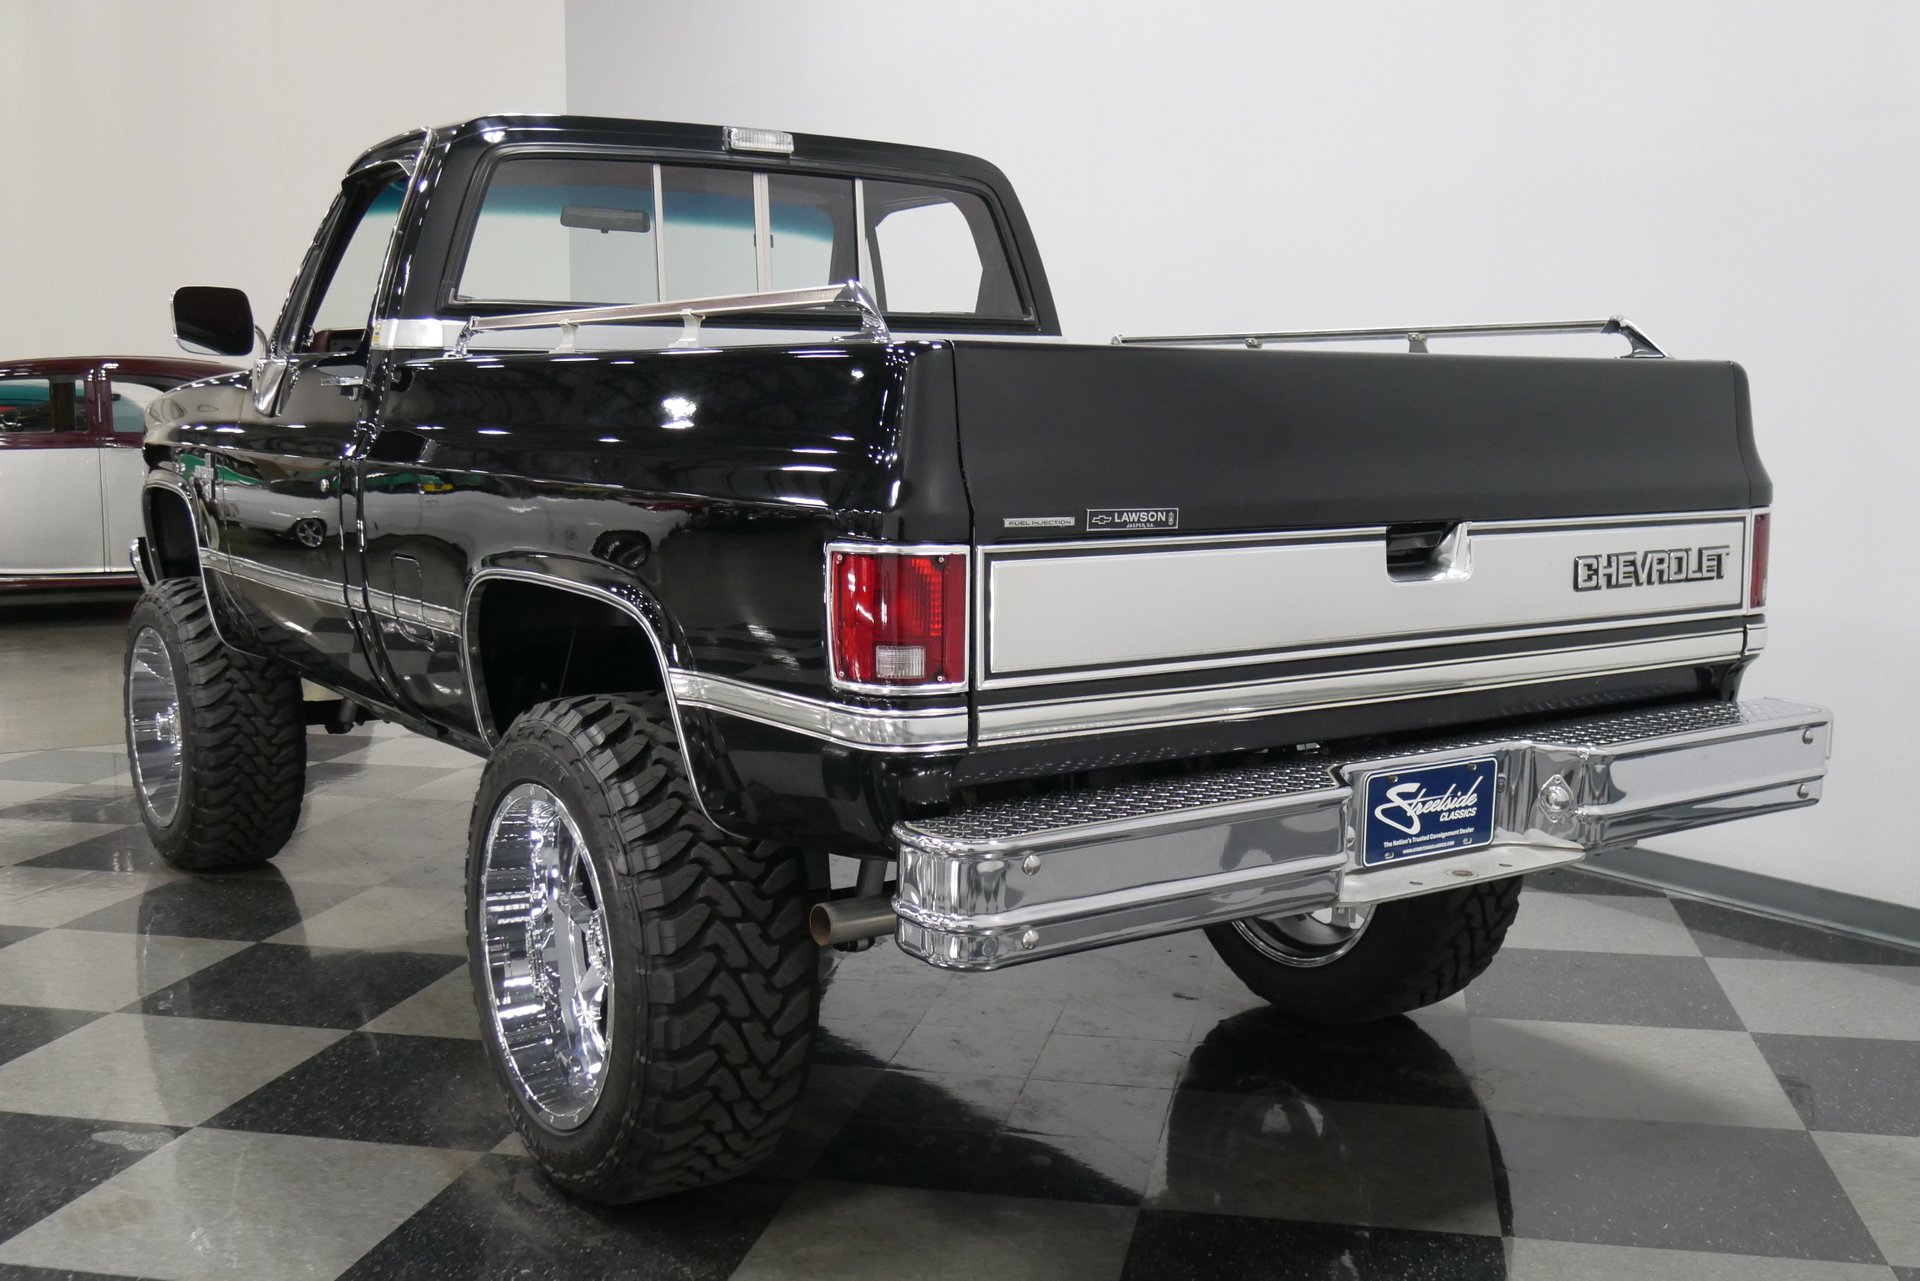 This 1987 Chevrolet K10 Silverado For Sale Is Square And Shiny.